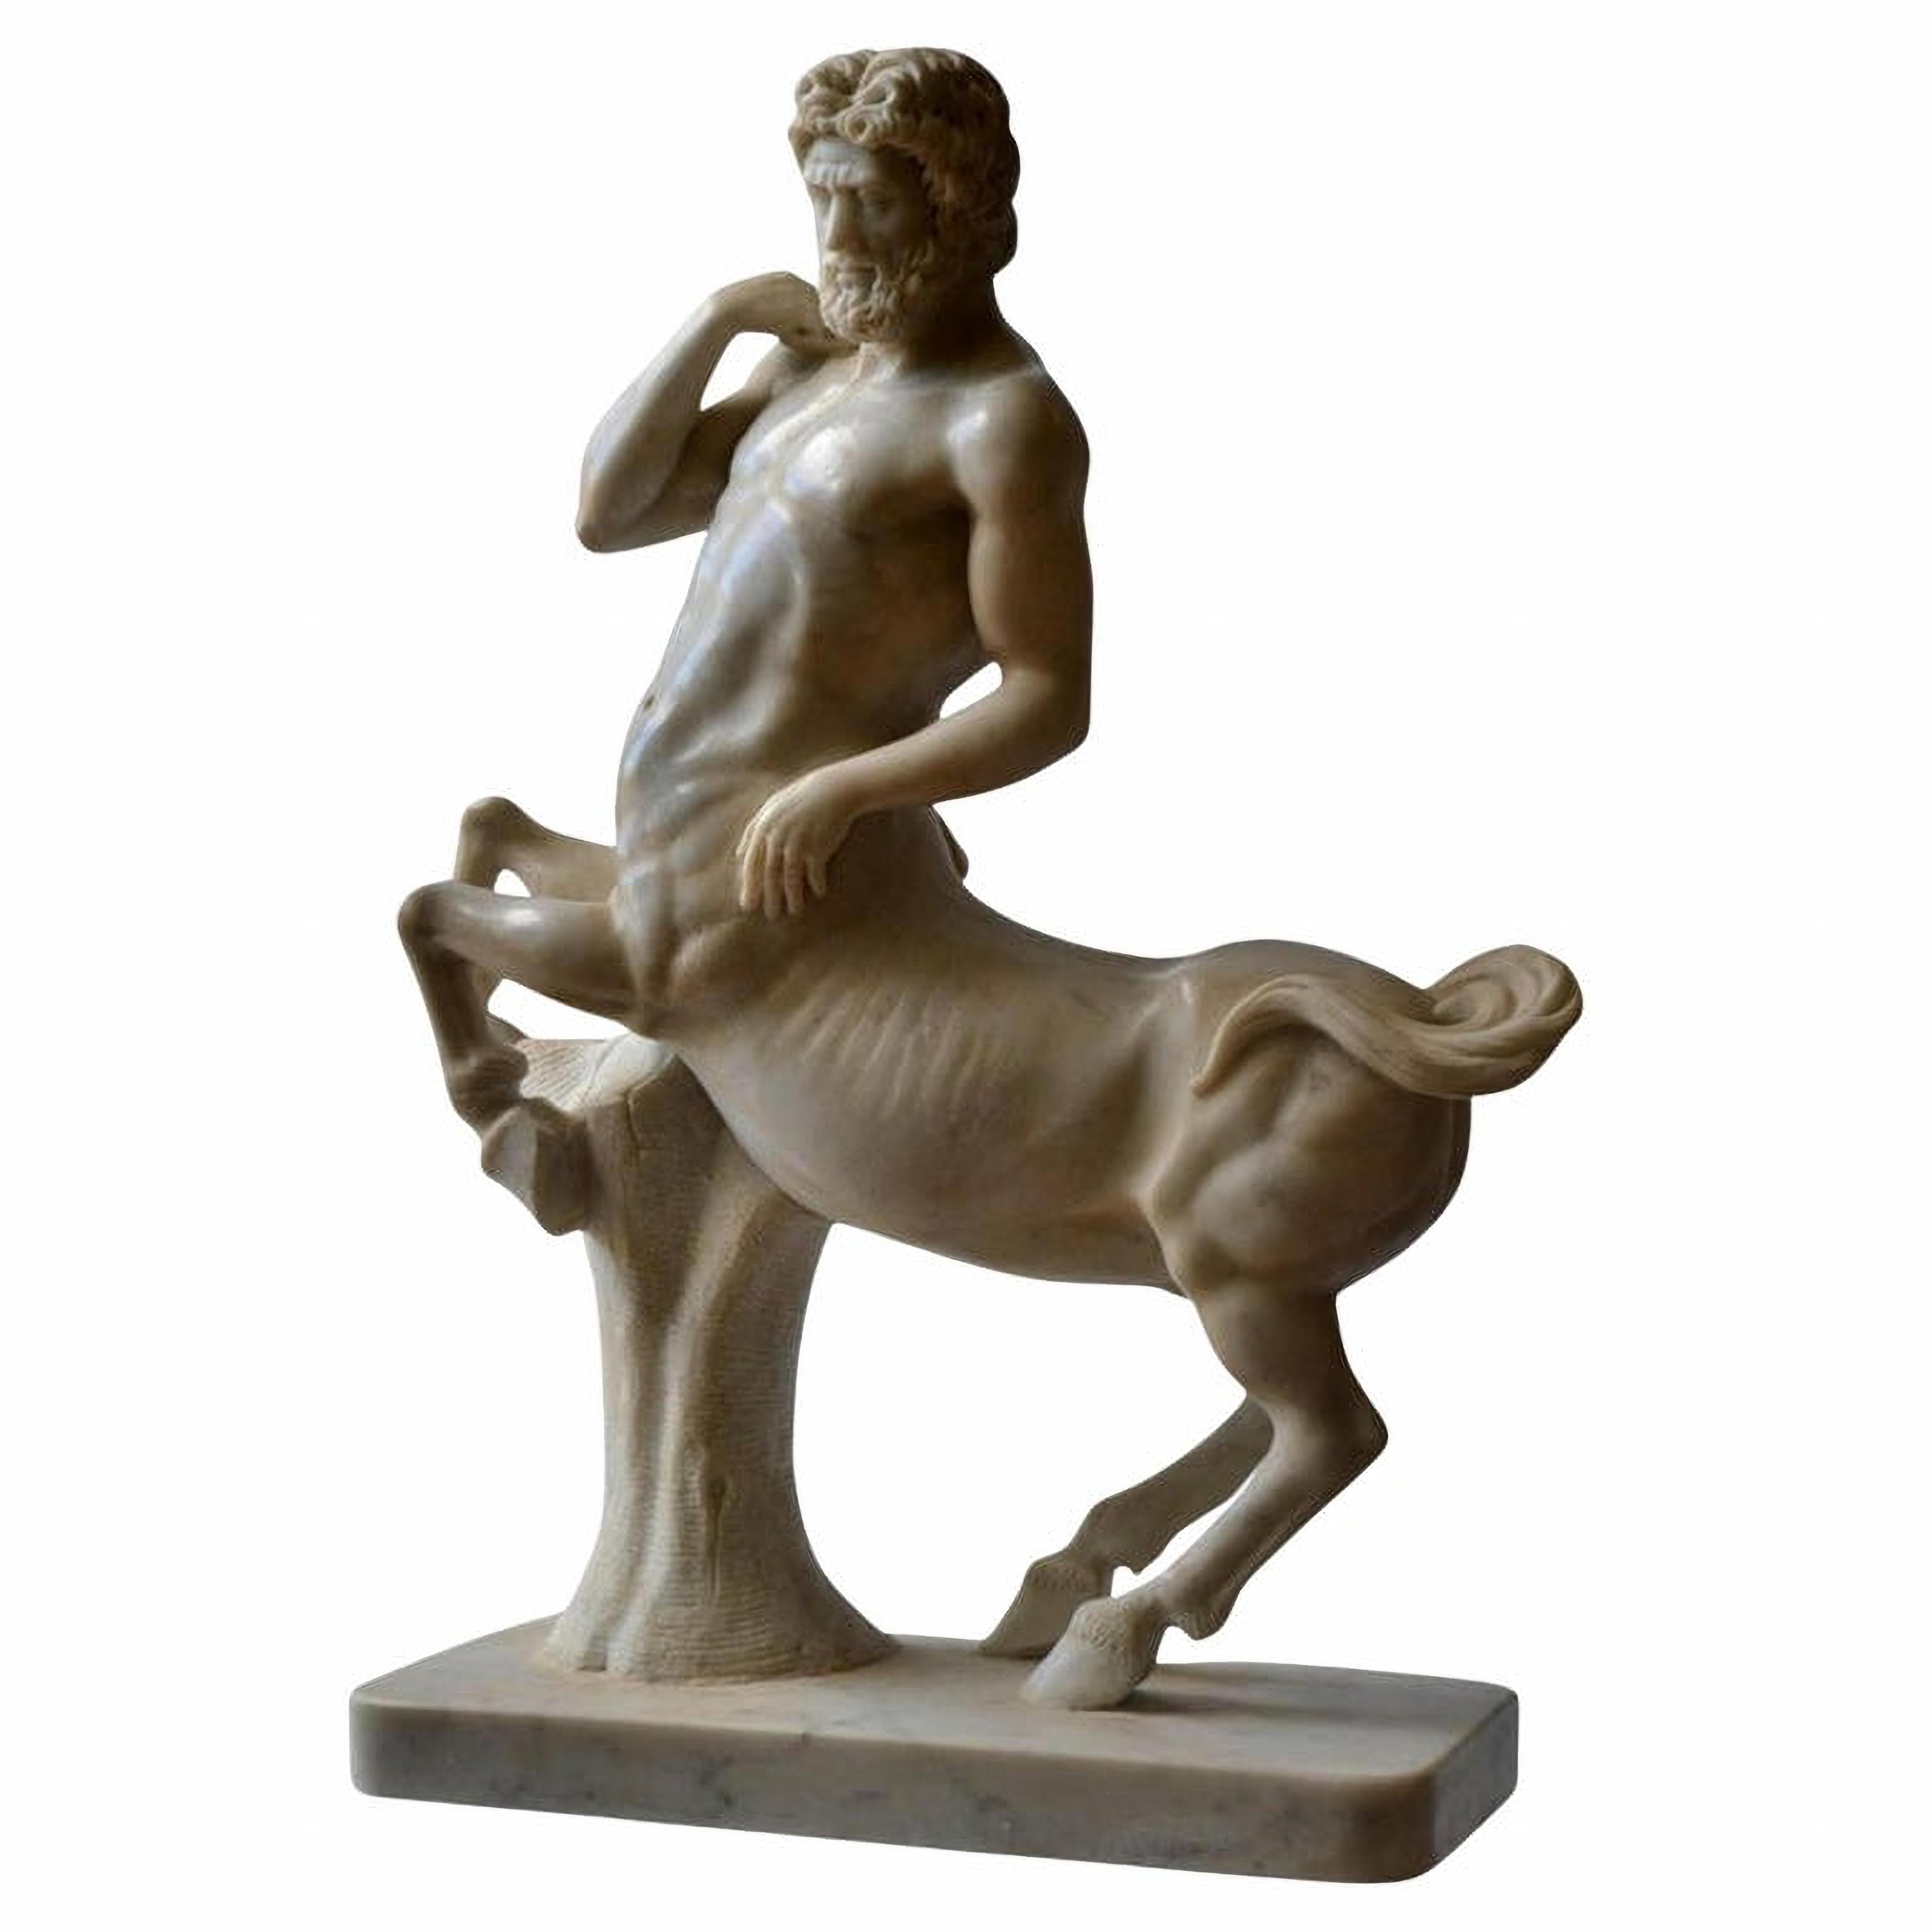 Unique Italian Centaur Sculpture Carved in Carrara Marble Early 20th Century For Sale 5